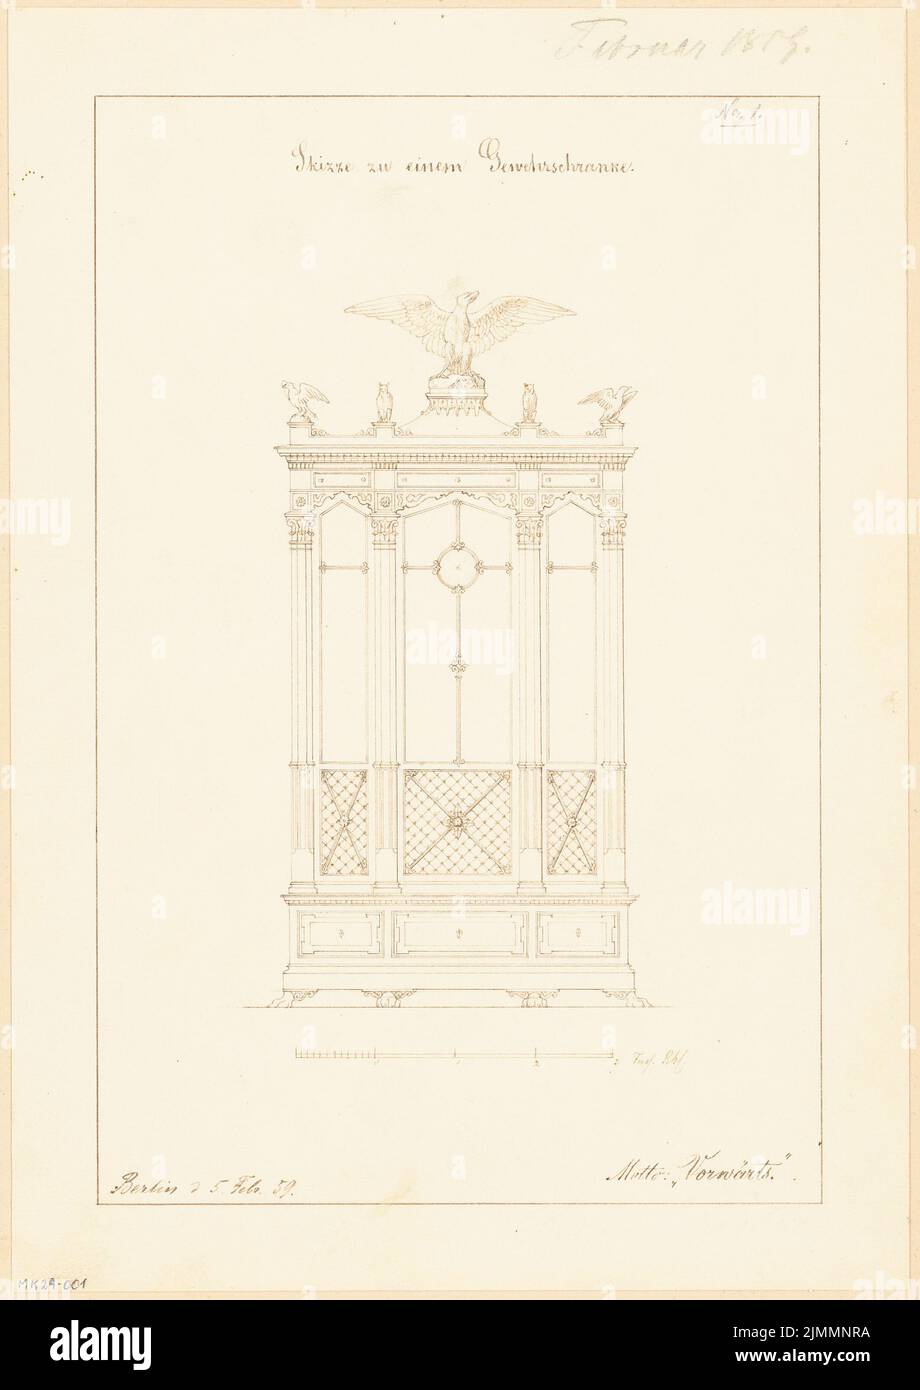 Schröter Victor (1839-1901), rifle cabinet. Monthly competition February 1859 (02.1859): Riss front view; Scale bar. Ink on paper, 31.4 x 22.2 cm (including scan edges) Stock Photo